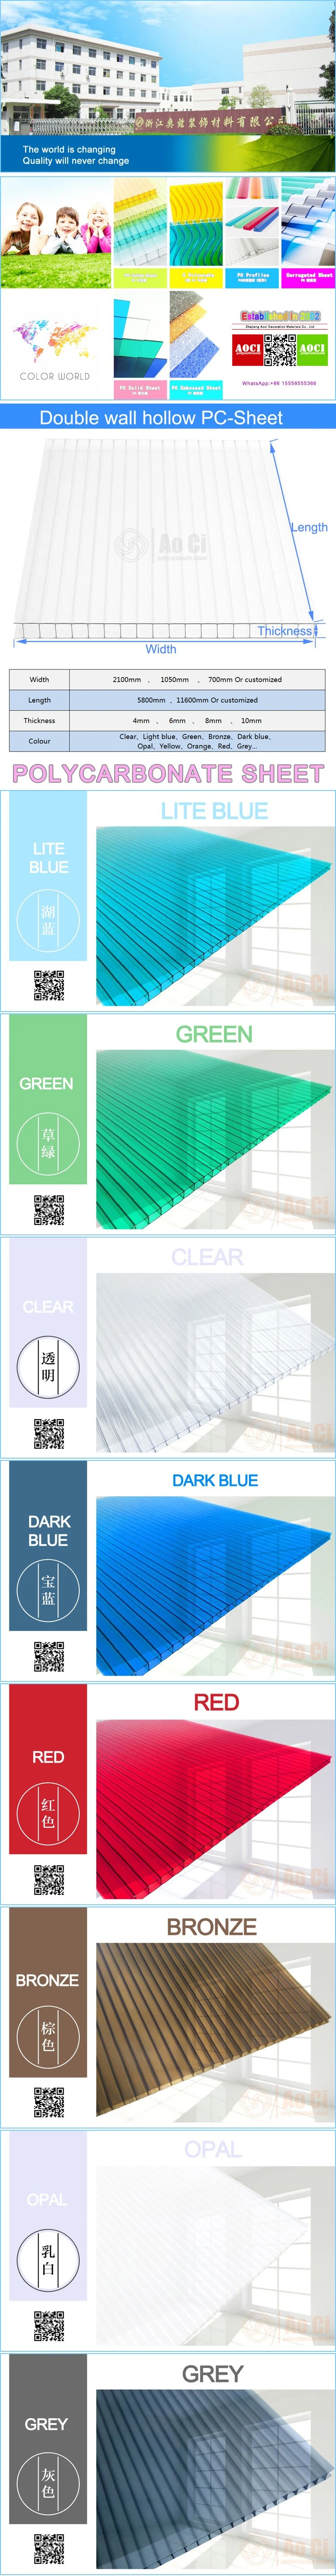 UV-Coated High Quality Bayer Two-Layer Hollow Sheet Polycarbonate Roofing Sheet